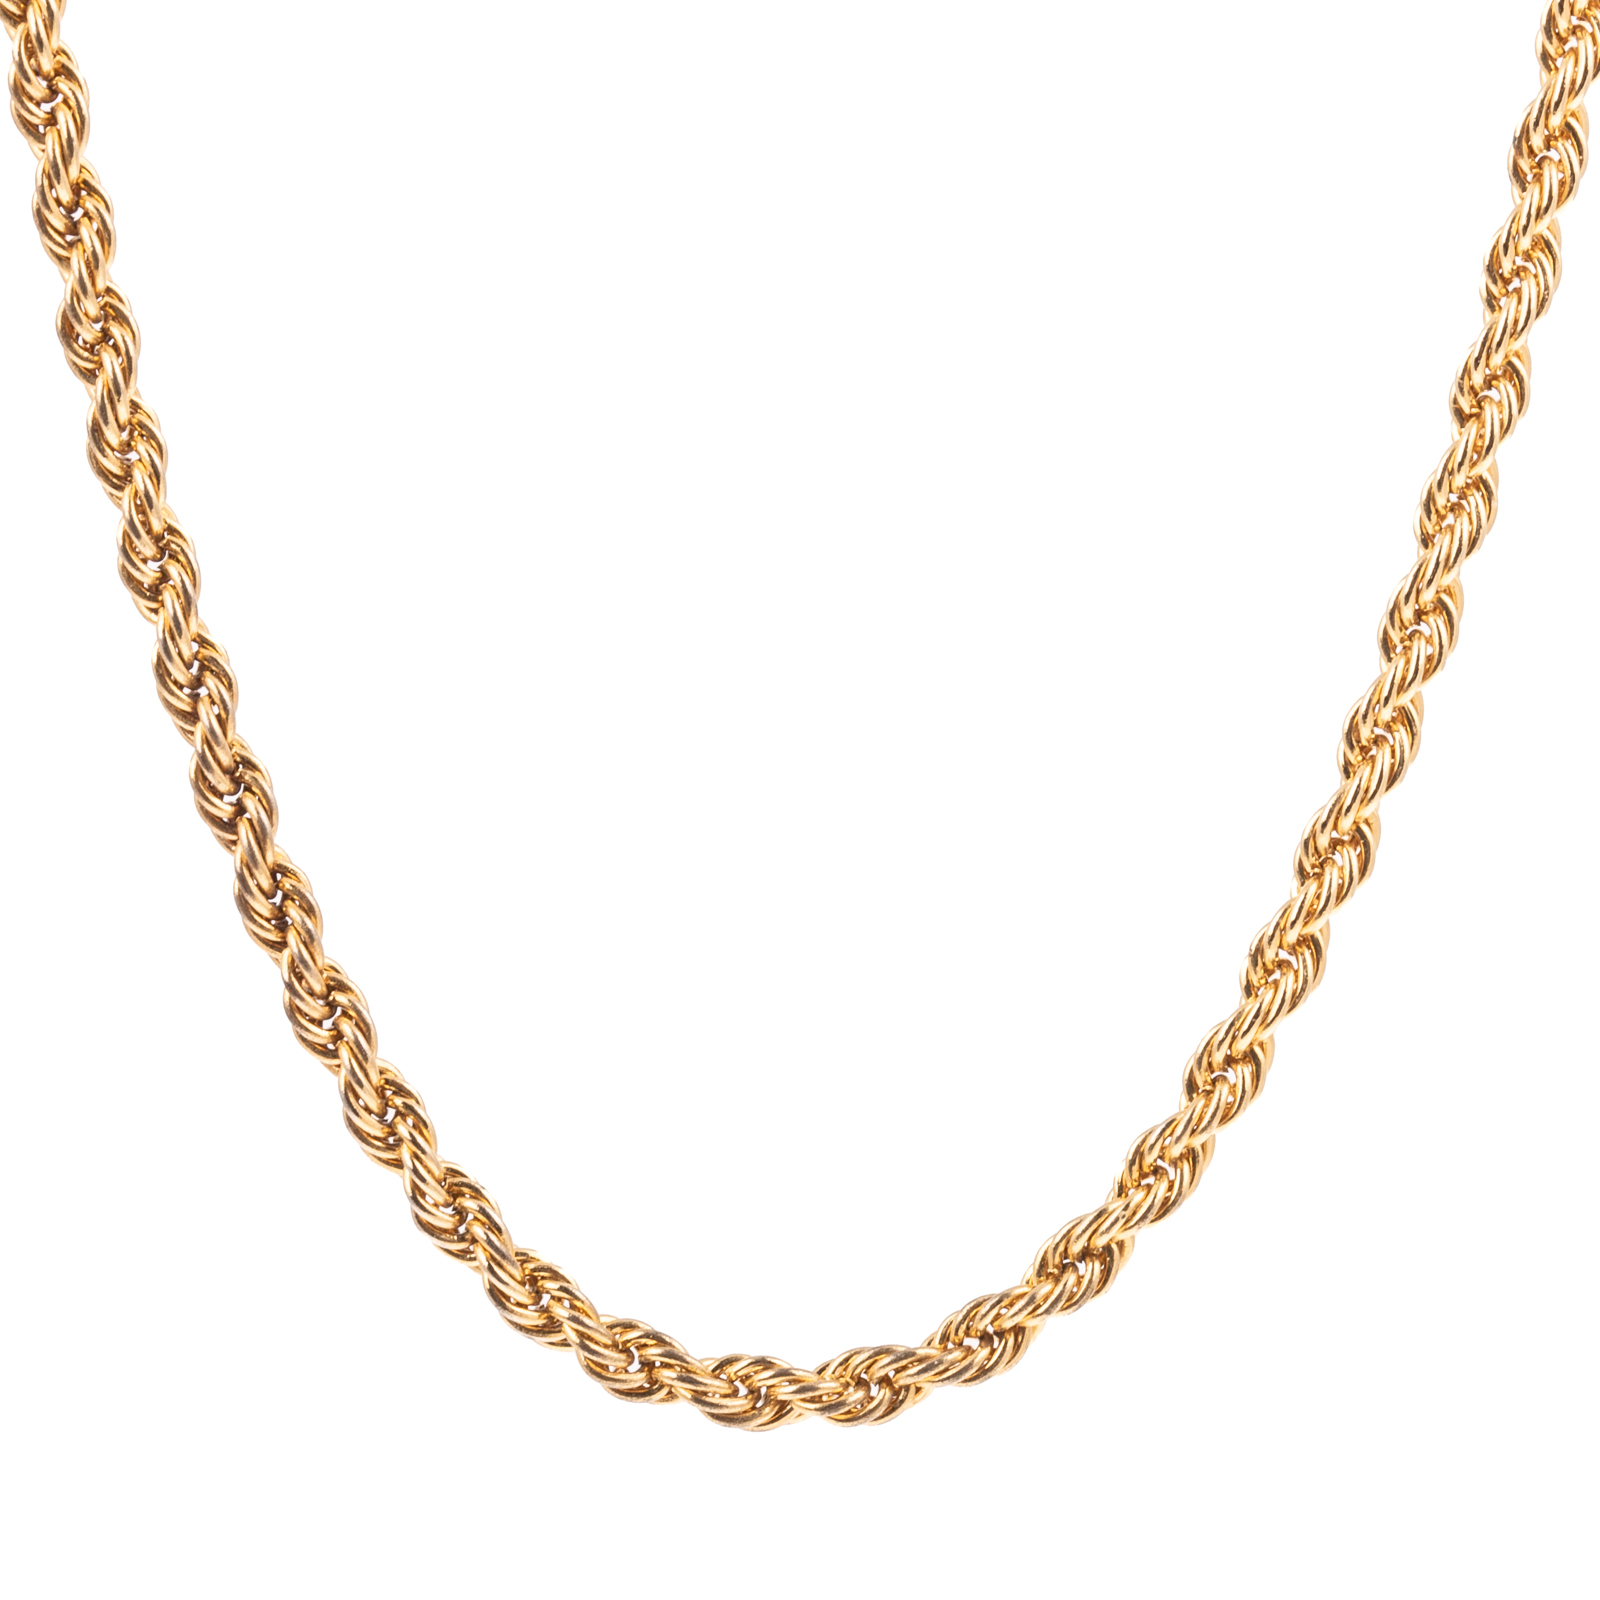 A ROPE CHAIN NECKLACE IN 14K 14K yellow